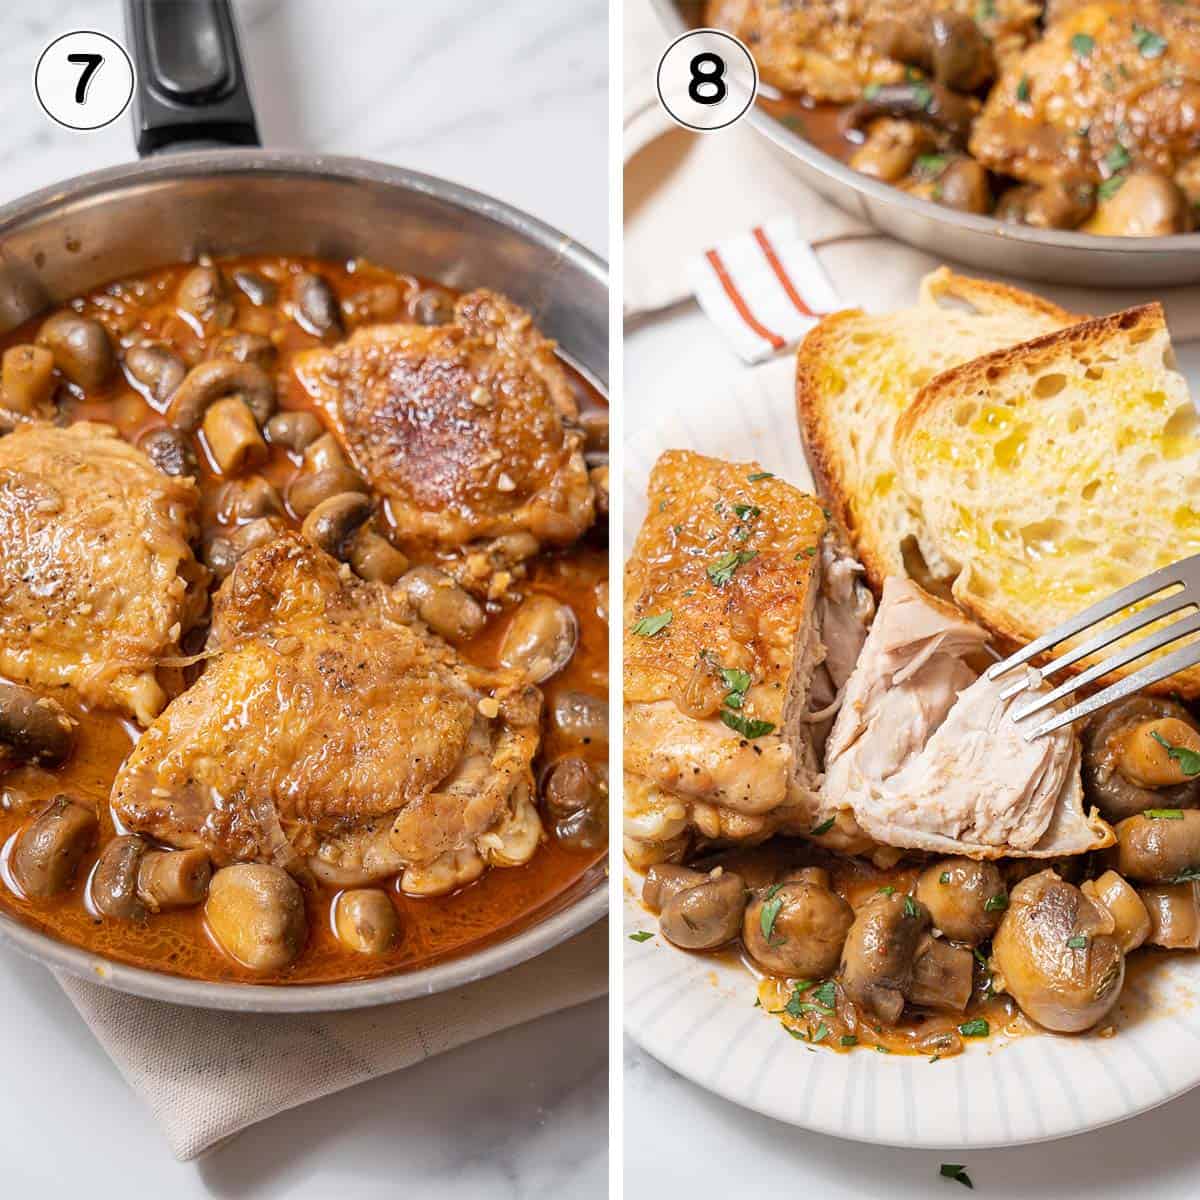 serving the chicken and mushrooms with bread.